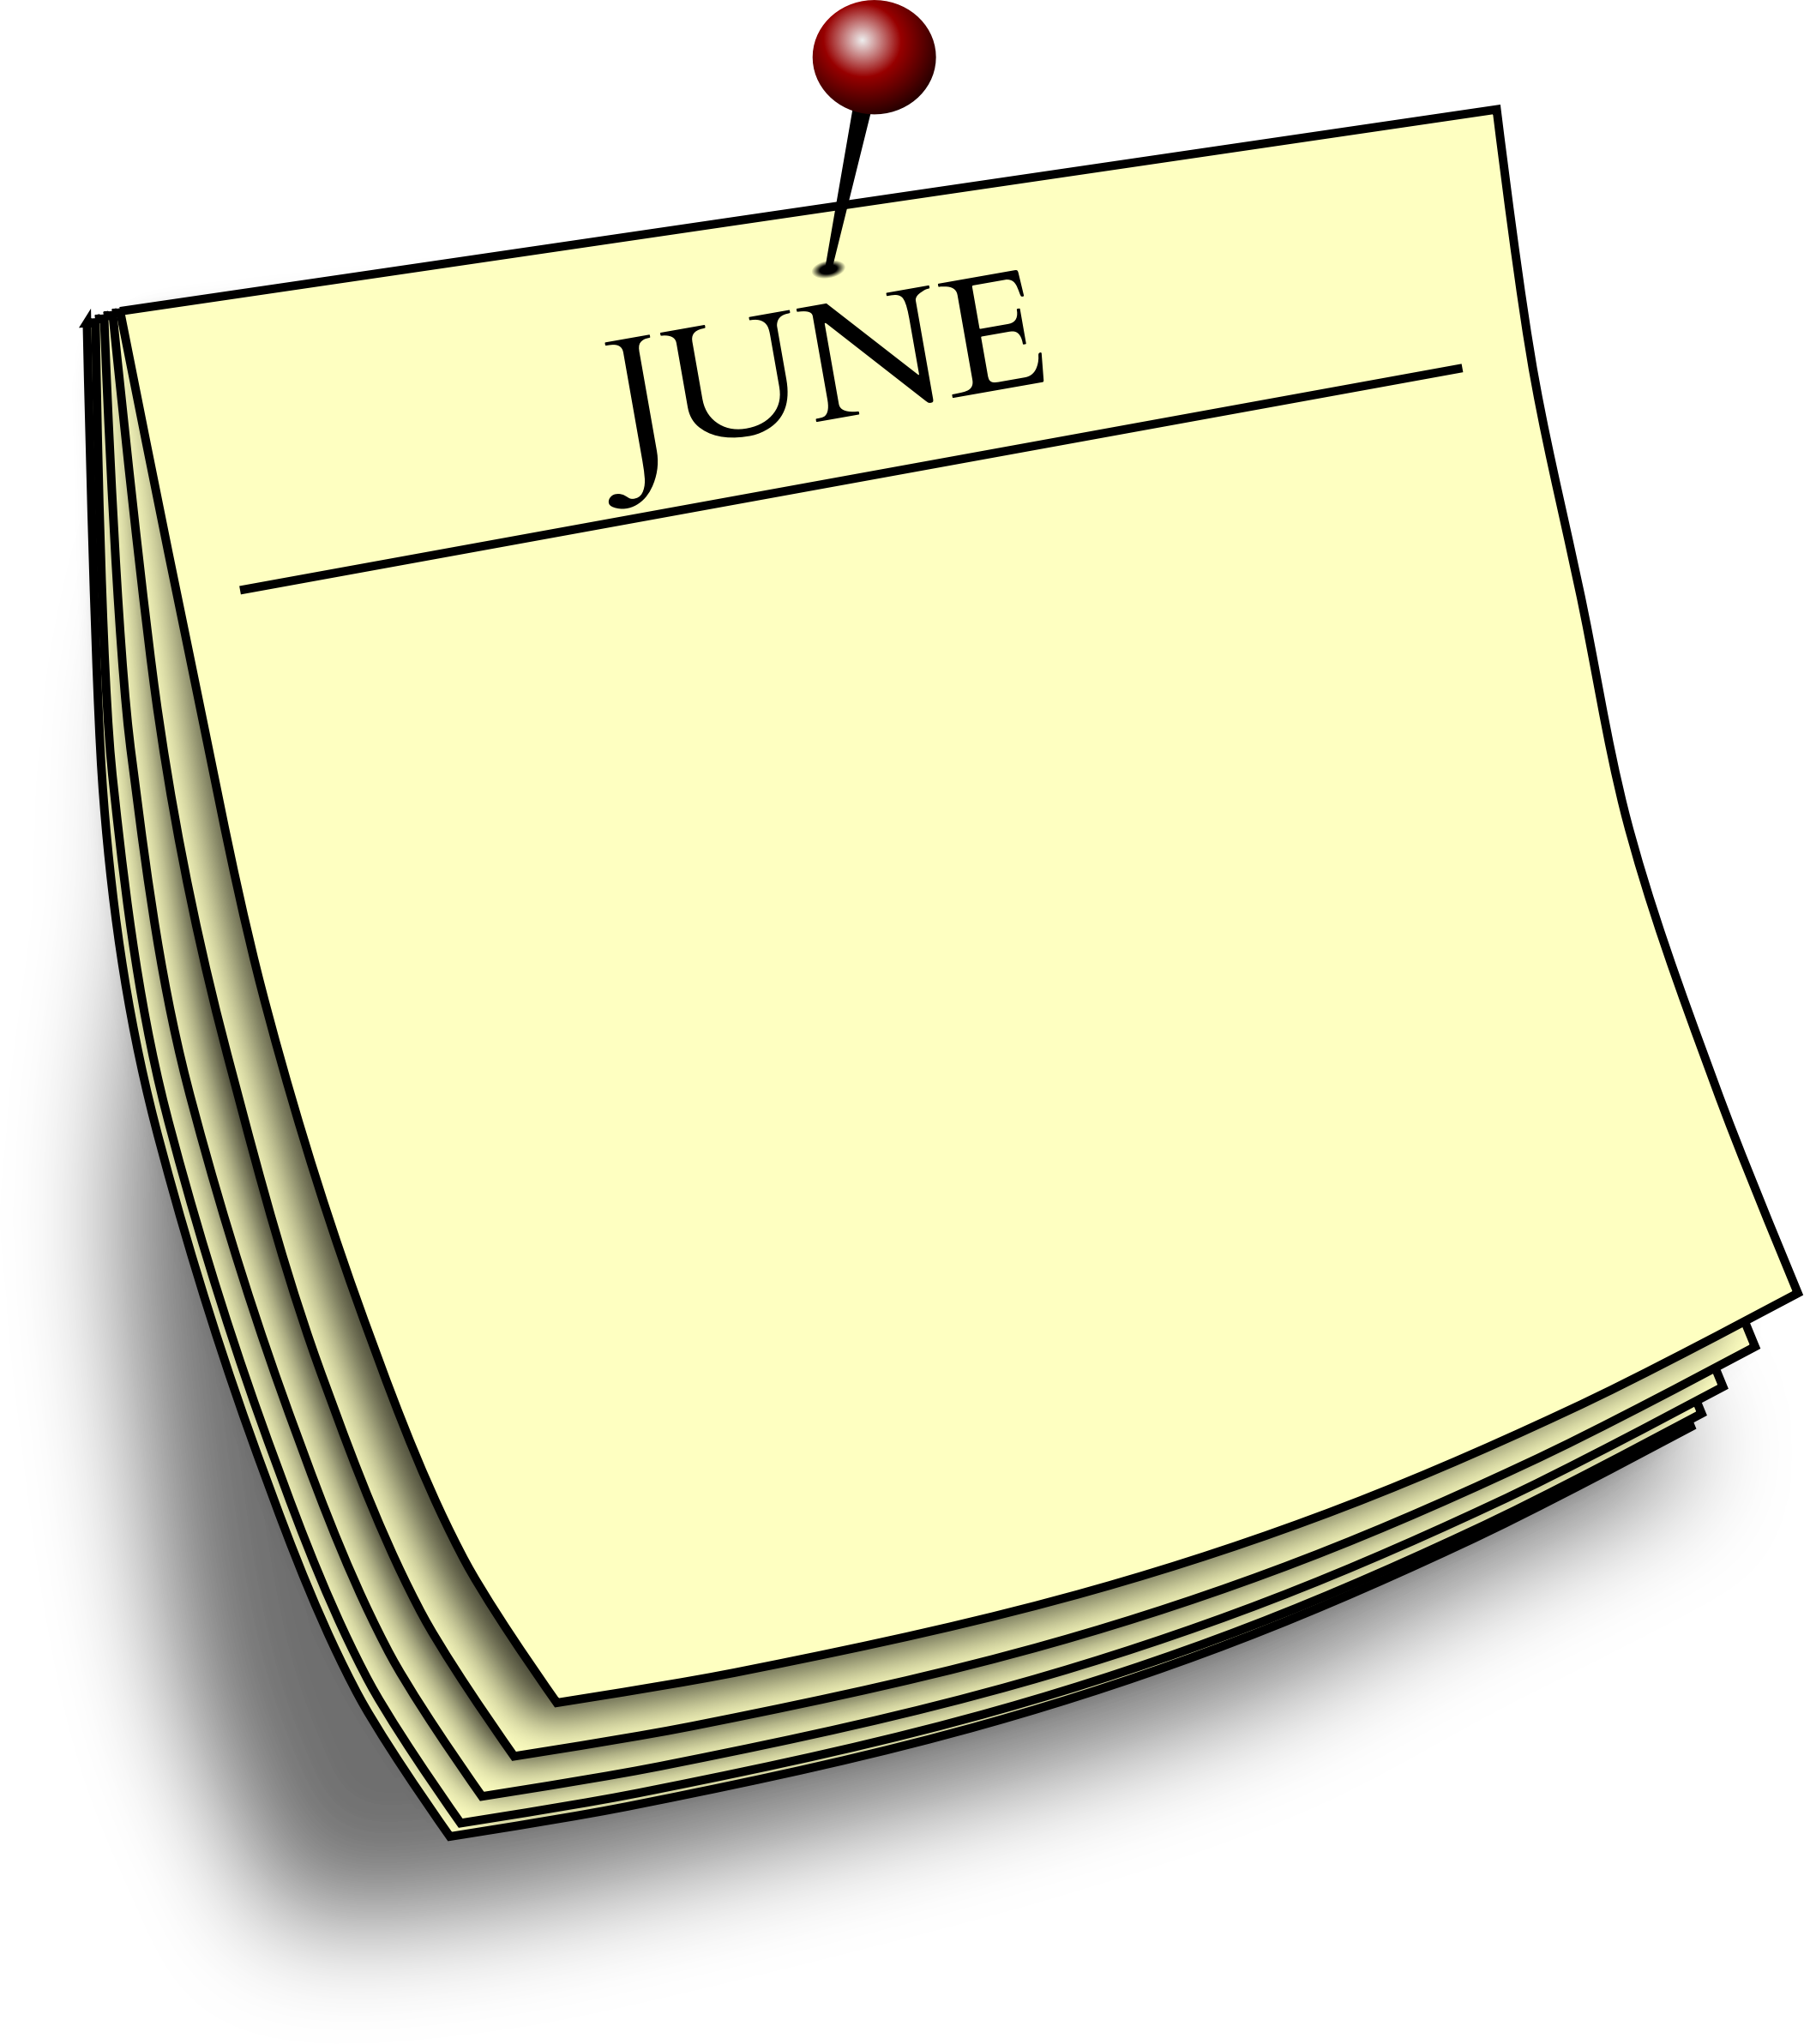 Monthly note big image. June clipart text